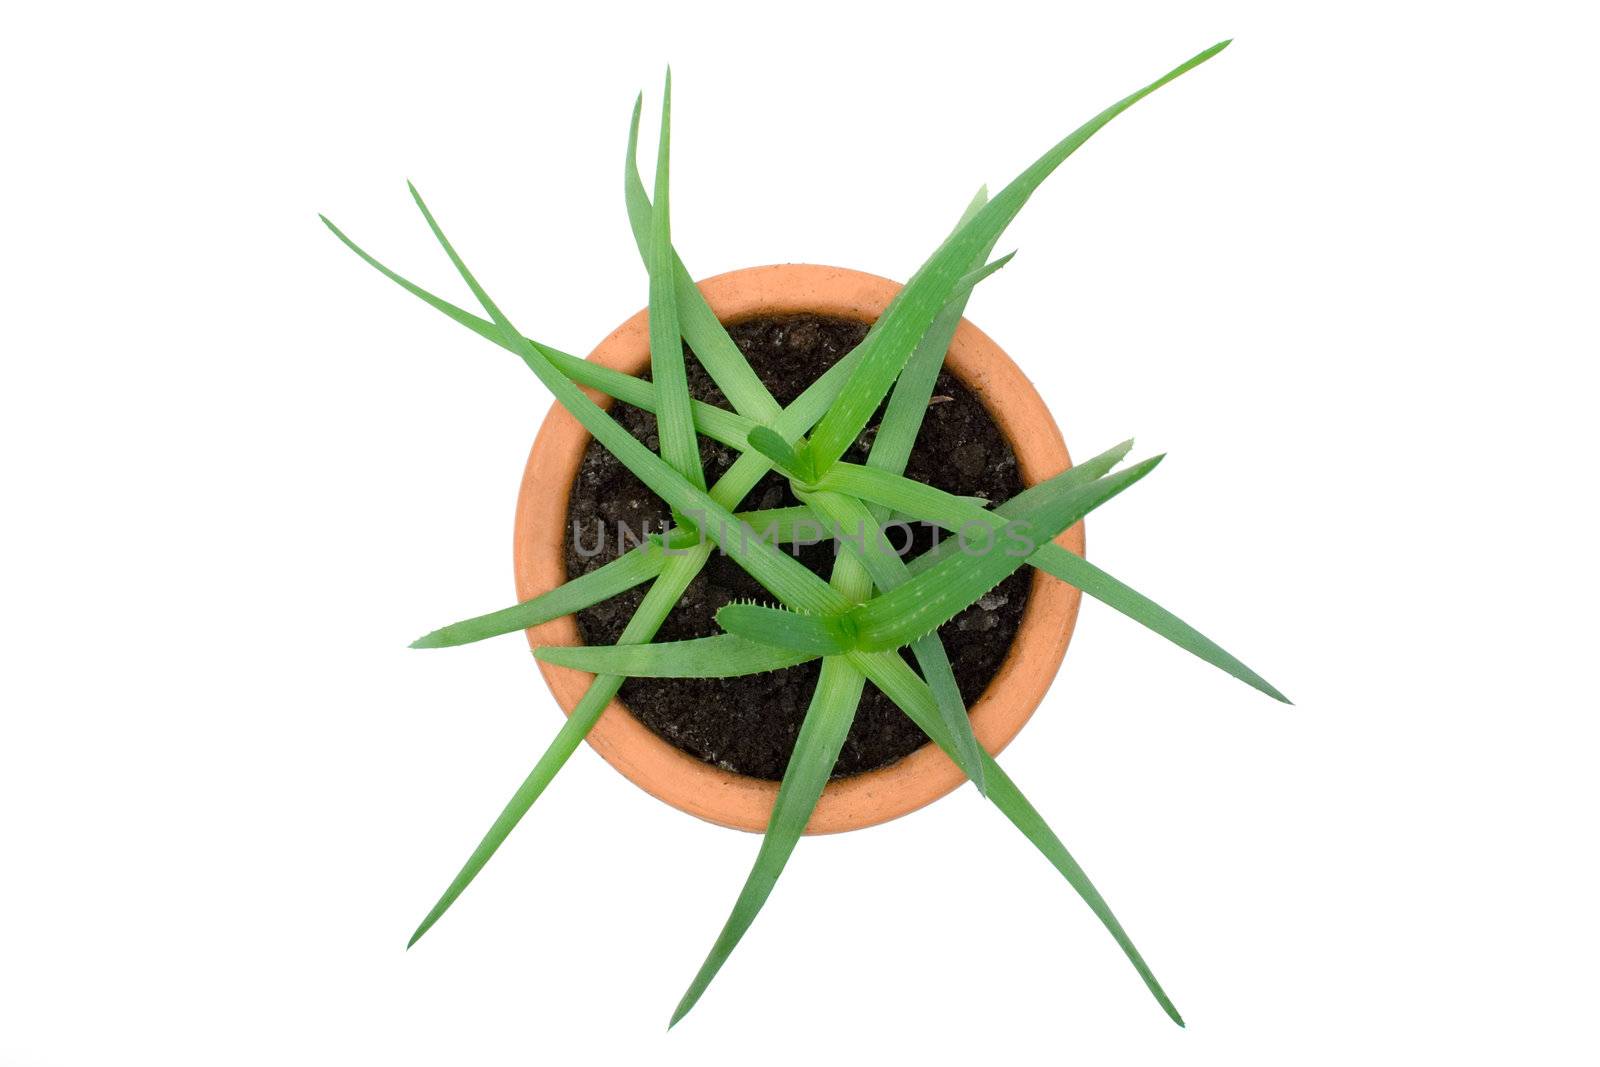 Aloe vera plant in a terracotta pot isolated on a white background.